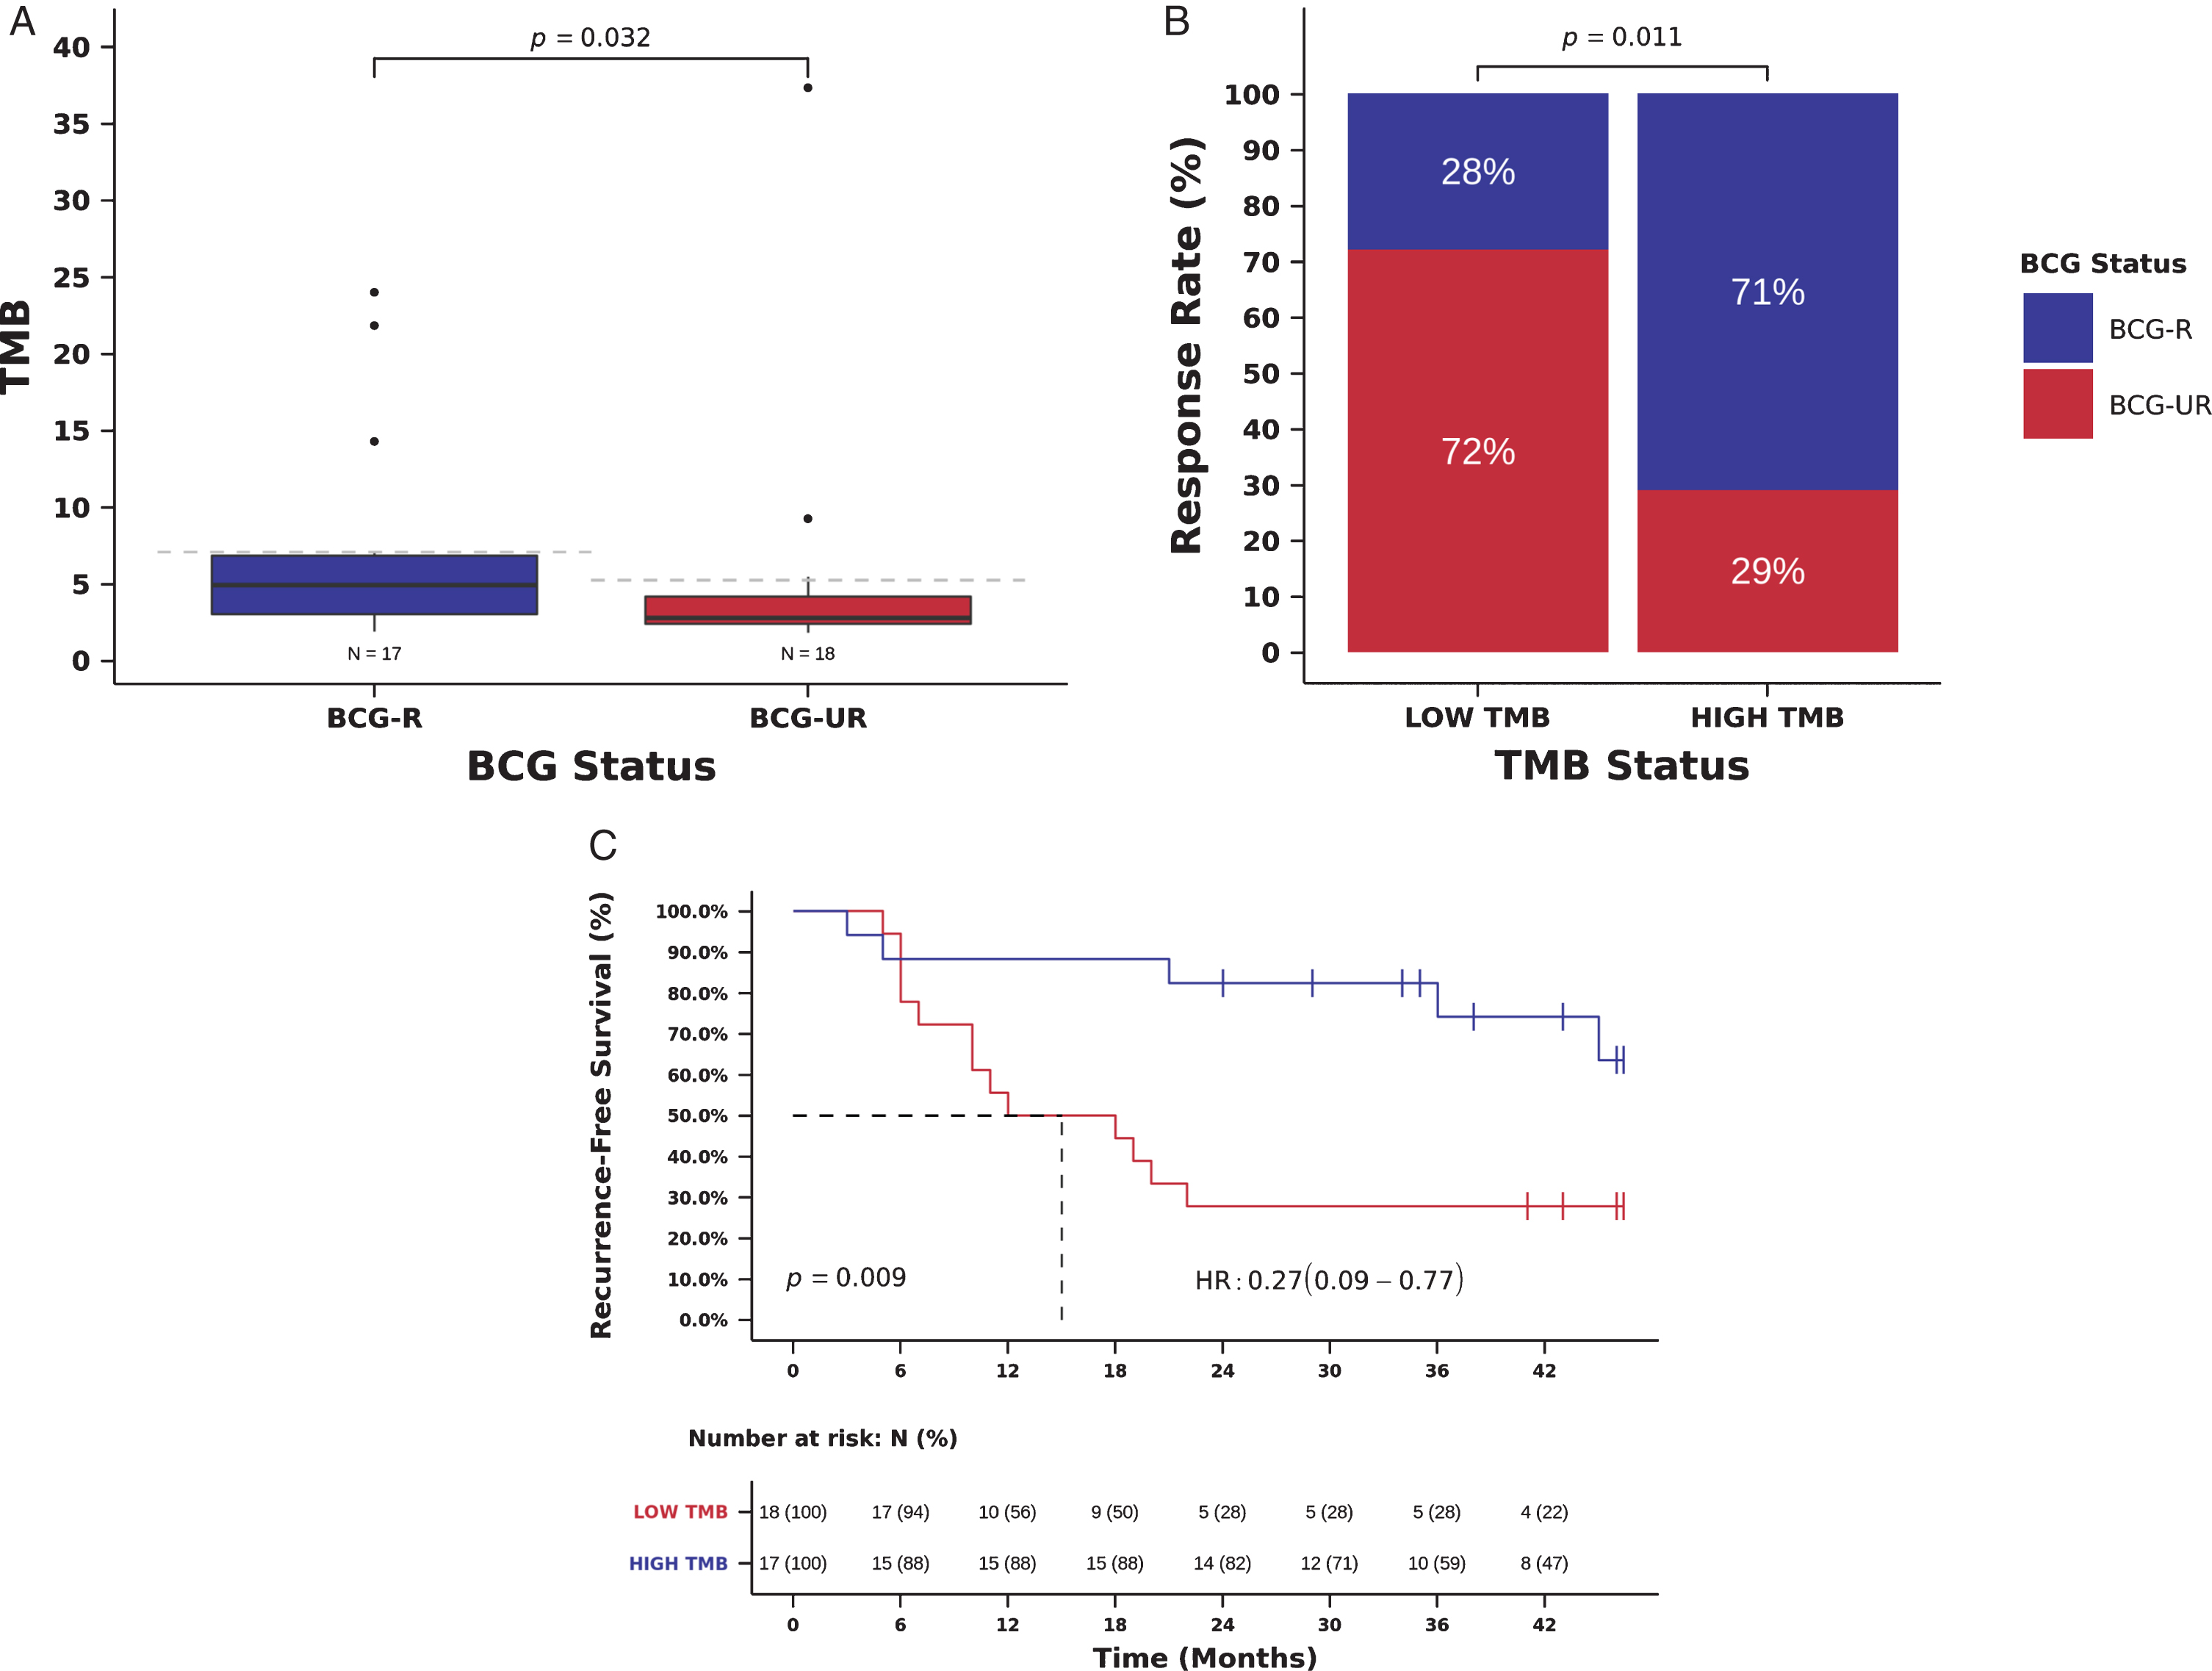 TMB and benefit from BCG immunotherapy. (A) TMB in tumors from patients responsive (BCG-R) and unresponsive (BCG-UR) to BCG immunotherapy (TMB BCG-R=4.9 vs. BCG-UR=2.8, mutations/Mb, Mann-Whitney P = 0.032) (B) BCG response rate in patients harboring tumors with high TMB (HIGH-TMB) compared to tumors with low TMB (LOW-TMB) (RR HIGH-TMB=71% vs. LOW-TMB=28%, Odds Ratio (OR)=6.24, 95% CI: 1.44-27.06, Pearson Chi-Square P = 0.011) (C) Kaplan-Meier curve for recurrence-free survival after BCG immunotherapy for patients harboring tumors with HIGH-TMB compared to tumors with LOW-TMB. (RFS HIGH-TMB=38 vs. LOW-TMB=15 months, Hazard Ratio (HR)=0.27, 95% CI: 0.10- 0.77, Log-rank P = 0.009).